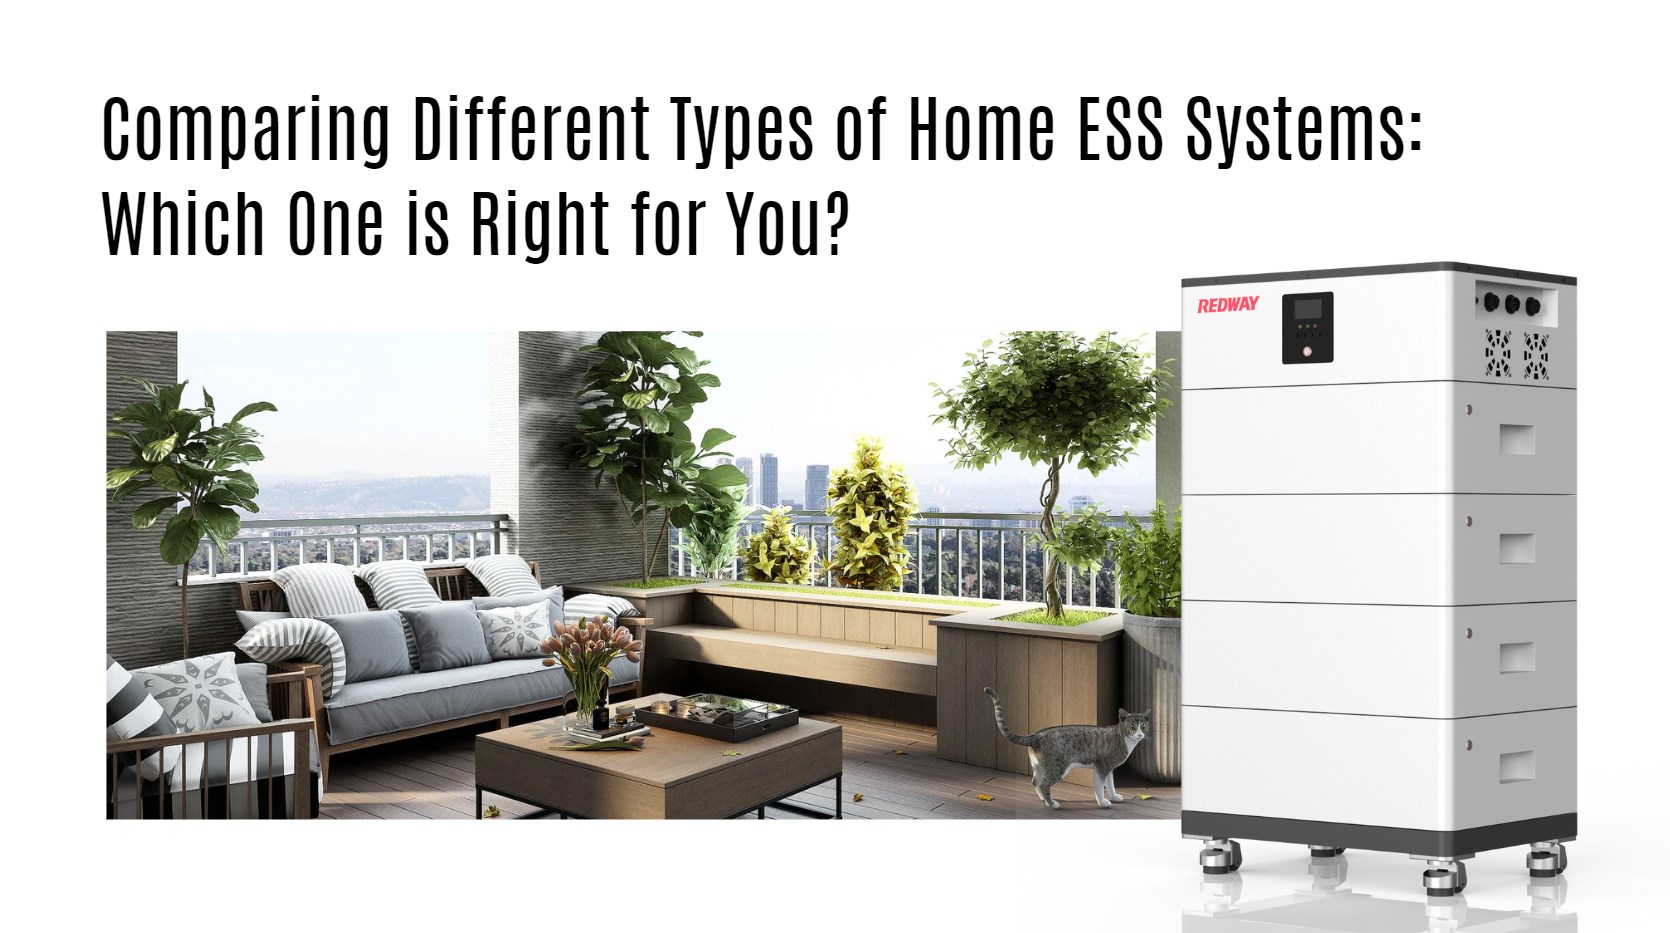 Comparing Different Types of Home ESS Systems: Which One is Right for You?